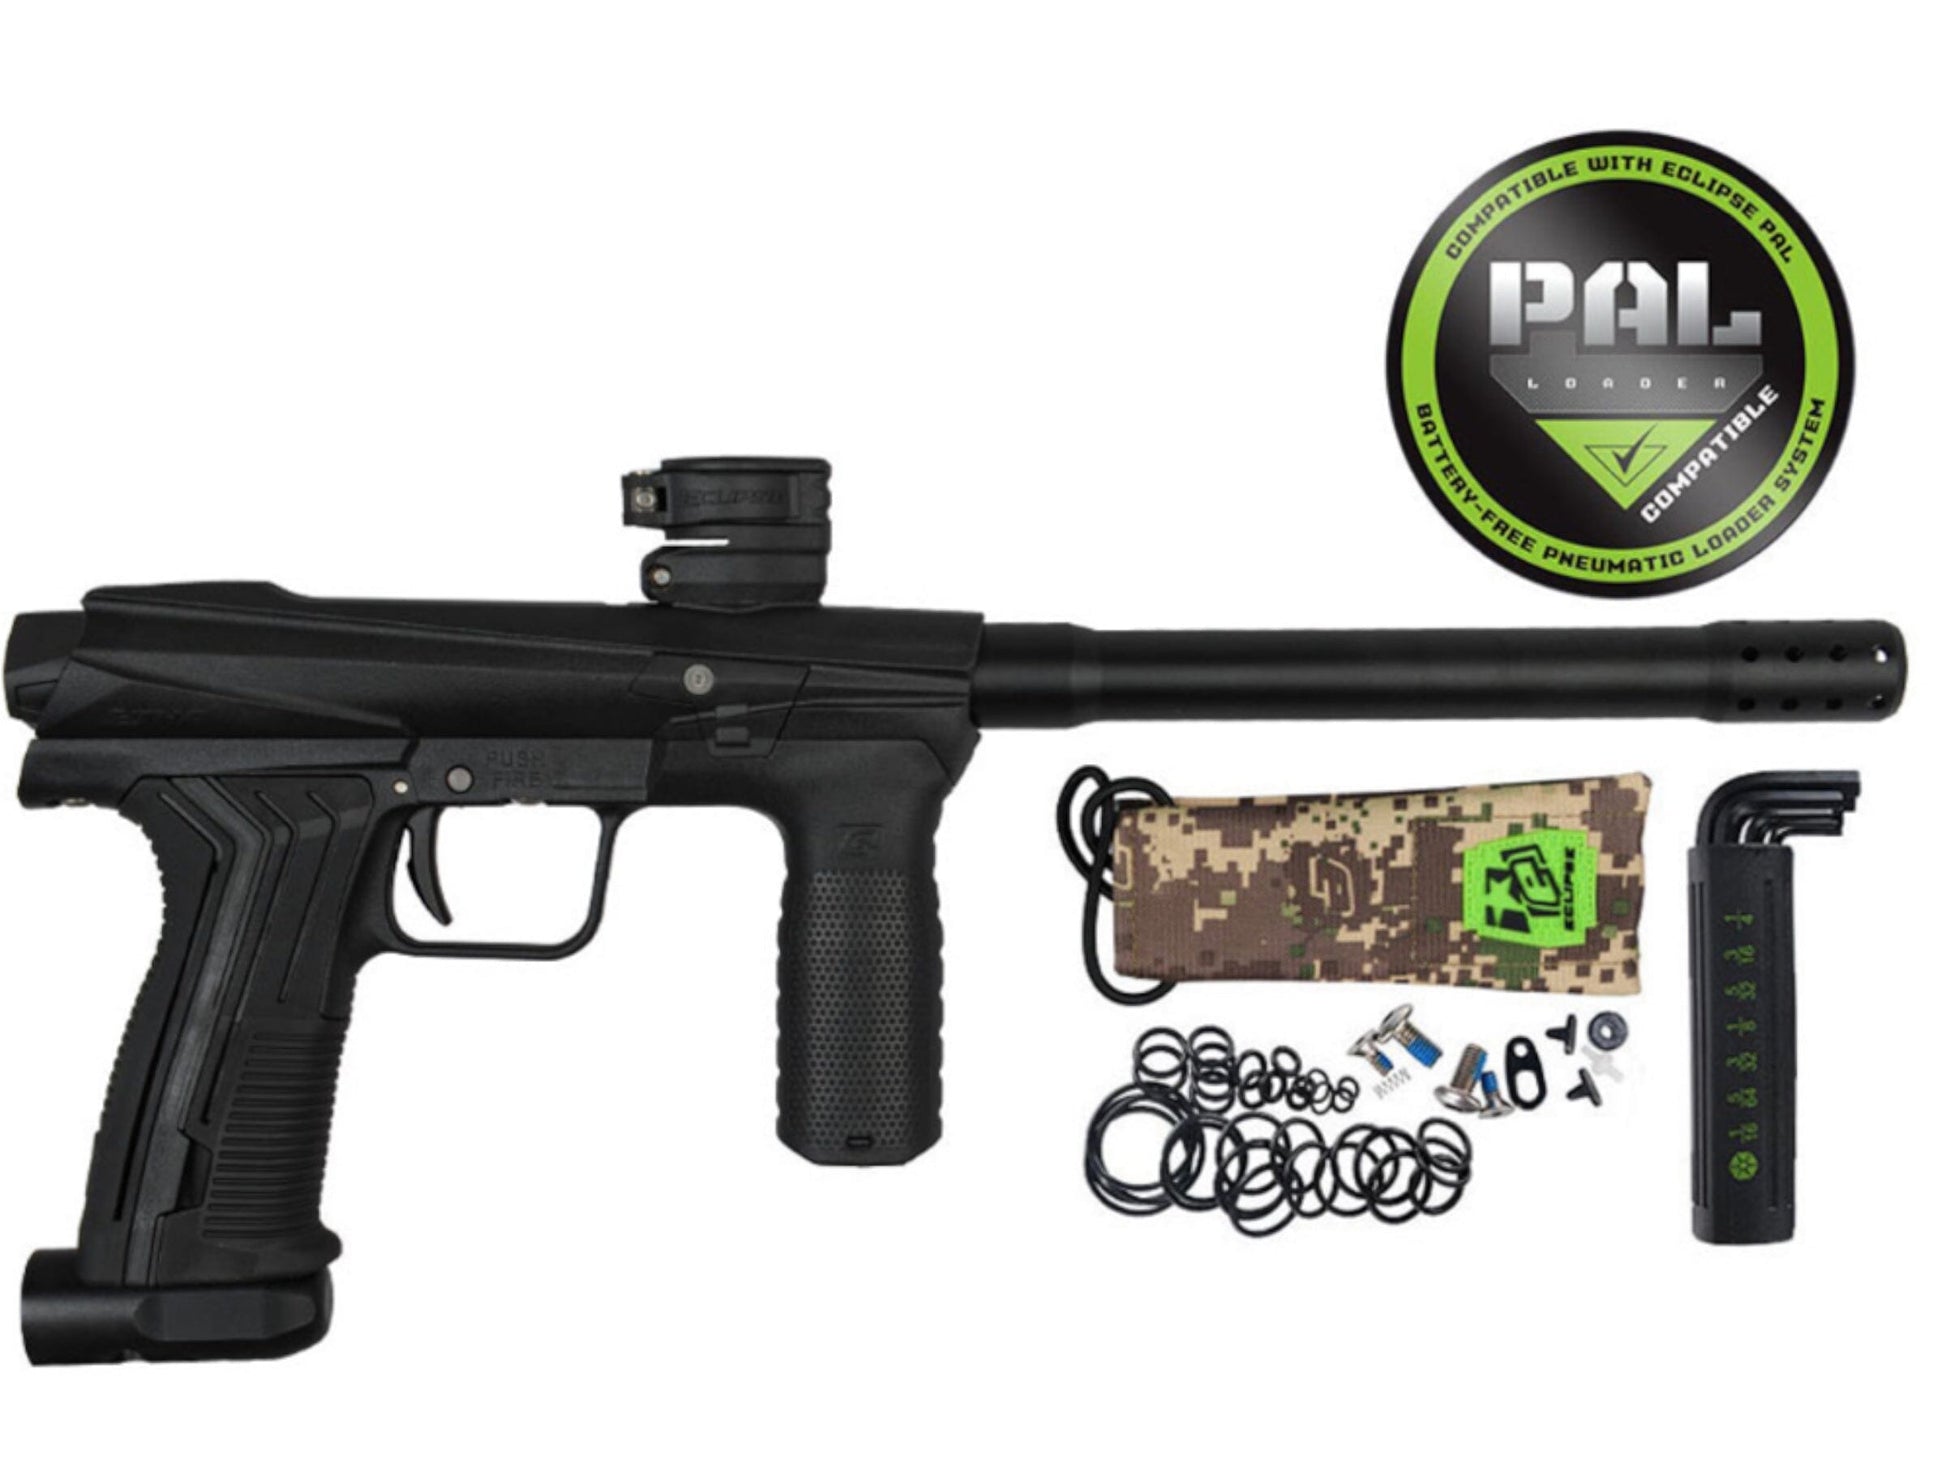 Used Planet Eclipse EMEK 100 (PAL Enabled) Mechanical Paintball Gun - Black Paintball Gun from CPXBrosPaintball Buy/Sell/Trade Paintball Markers, New Paintball Guns, Paintball Hoppers, Paintball Masks, and Hormesis Headbands